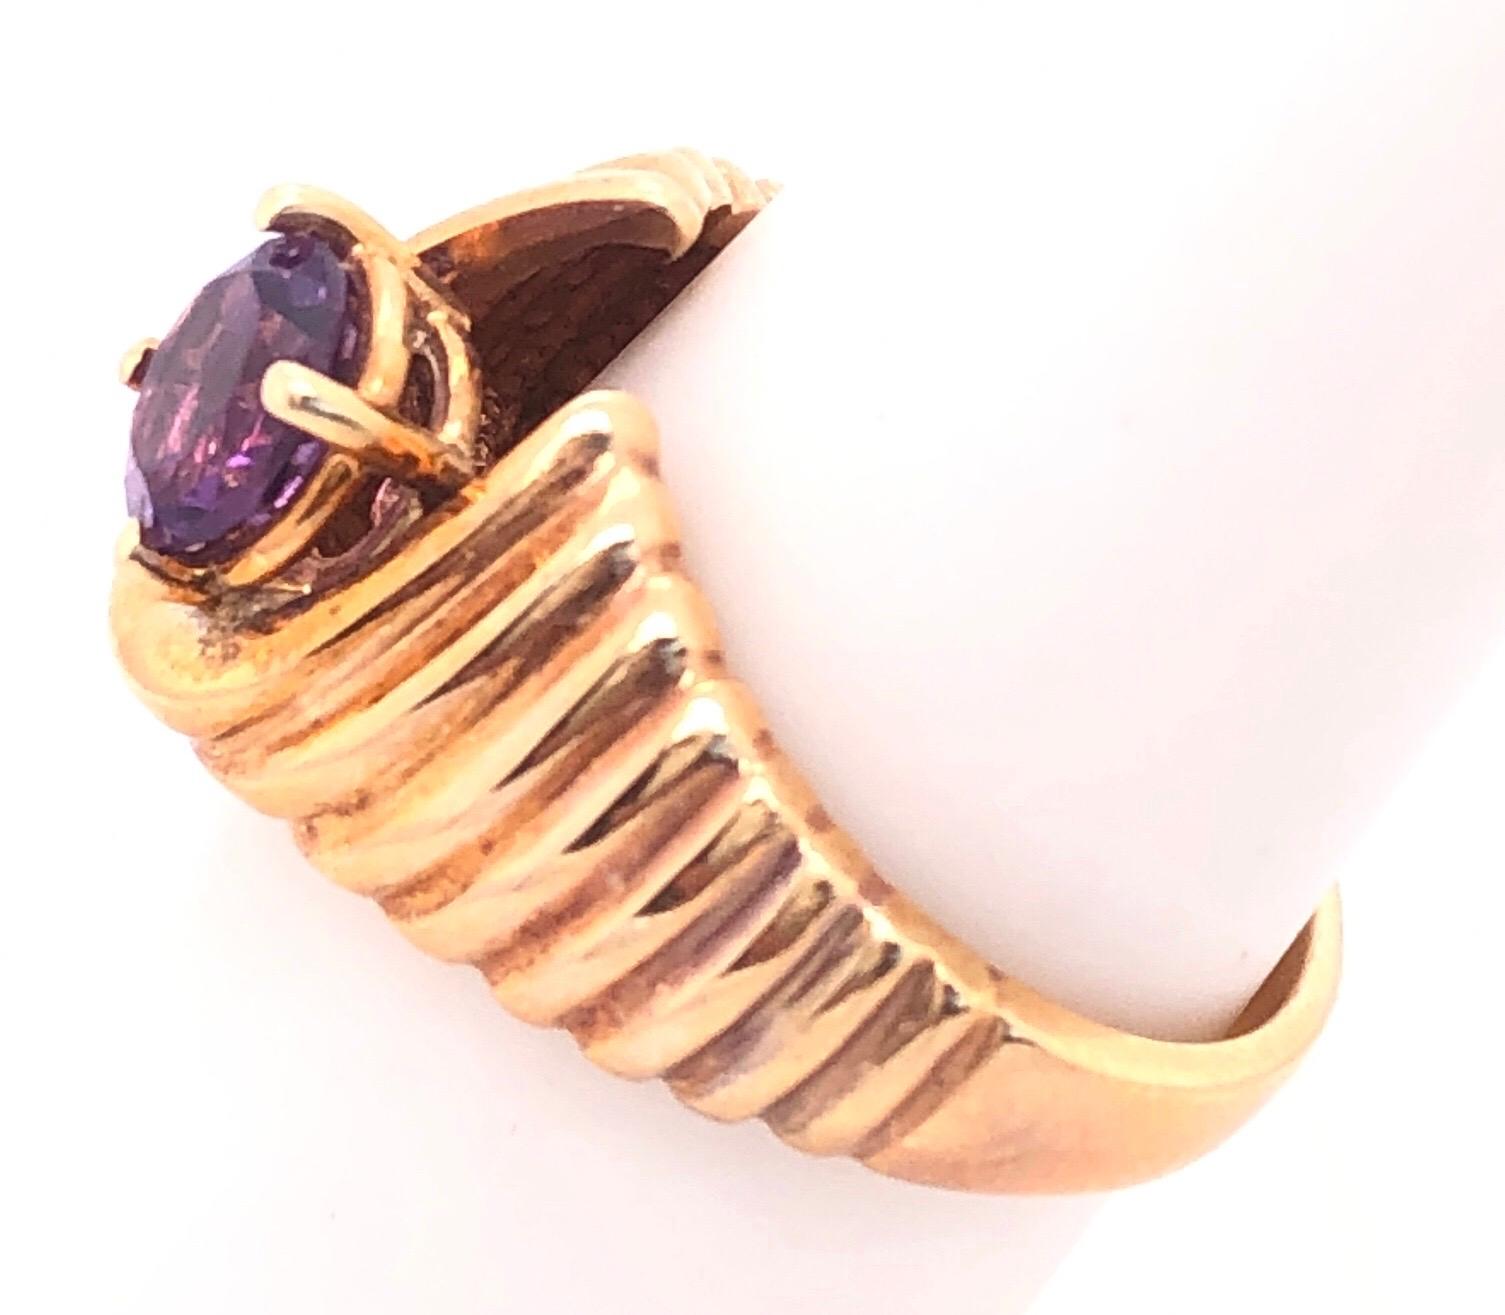 14 Karat Yellow Gold With Center Amethyst Dome Fashion Ring
Size 7
6 grams total weight.